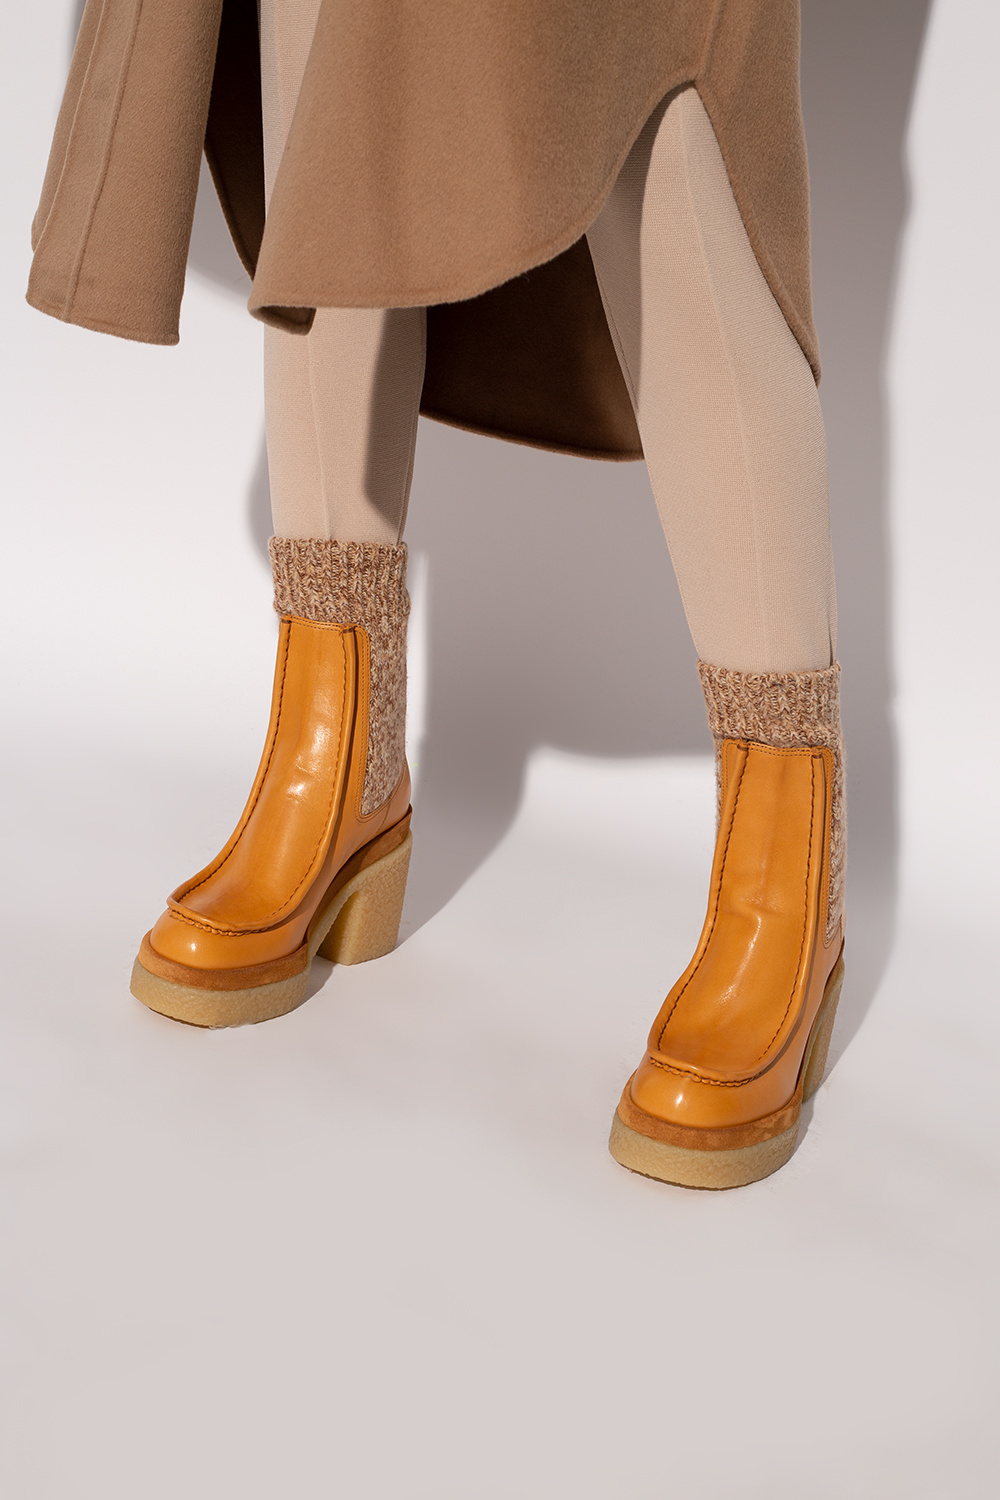 Chloé ‘Jamie’ leather ankle boots